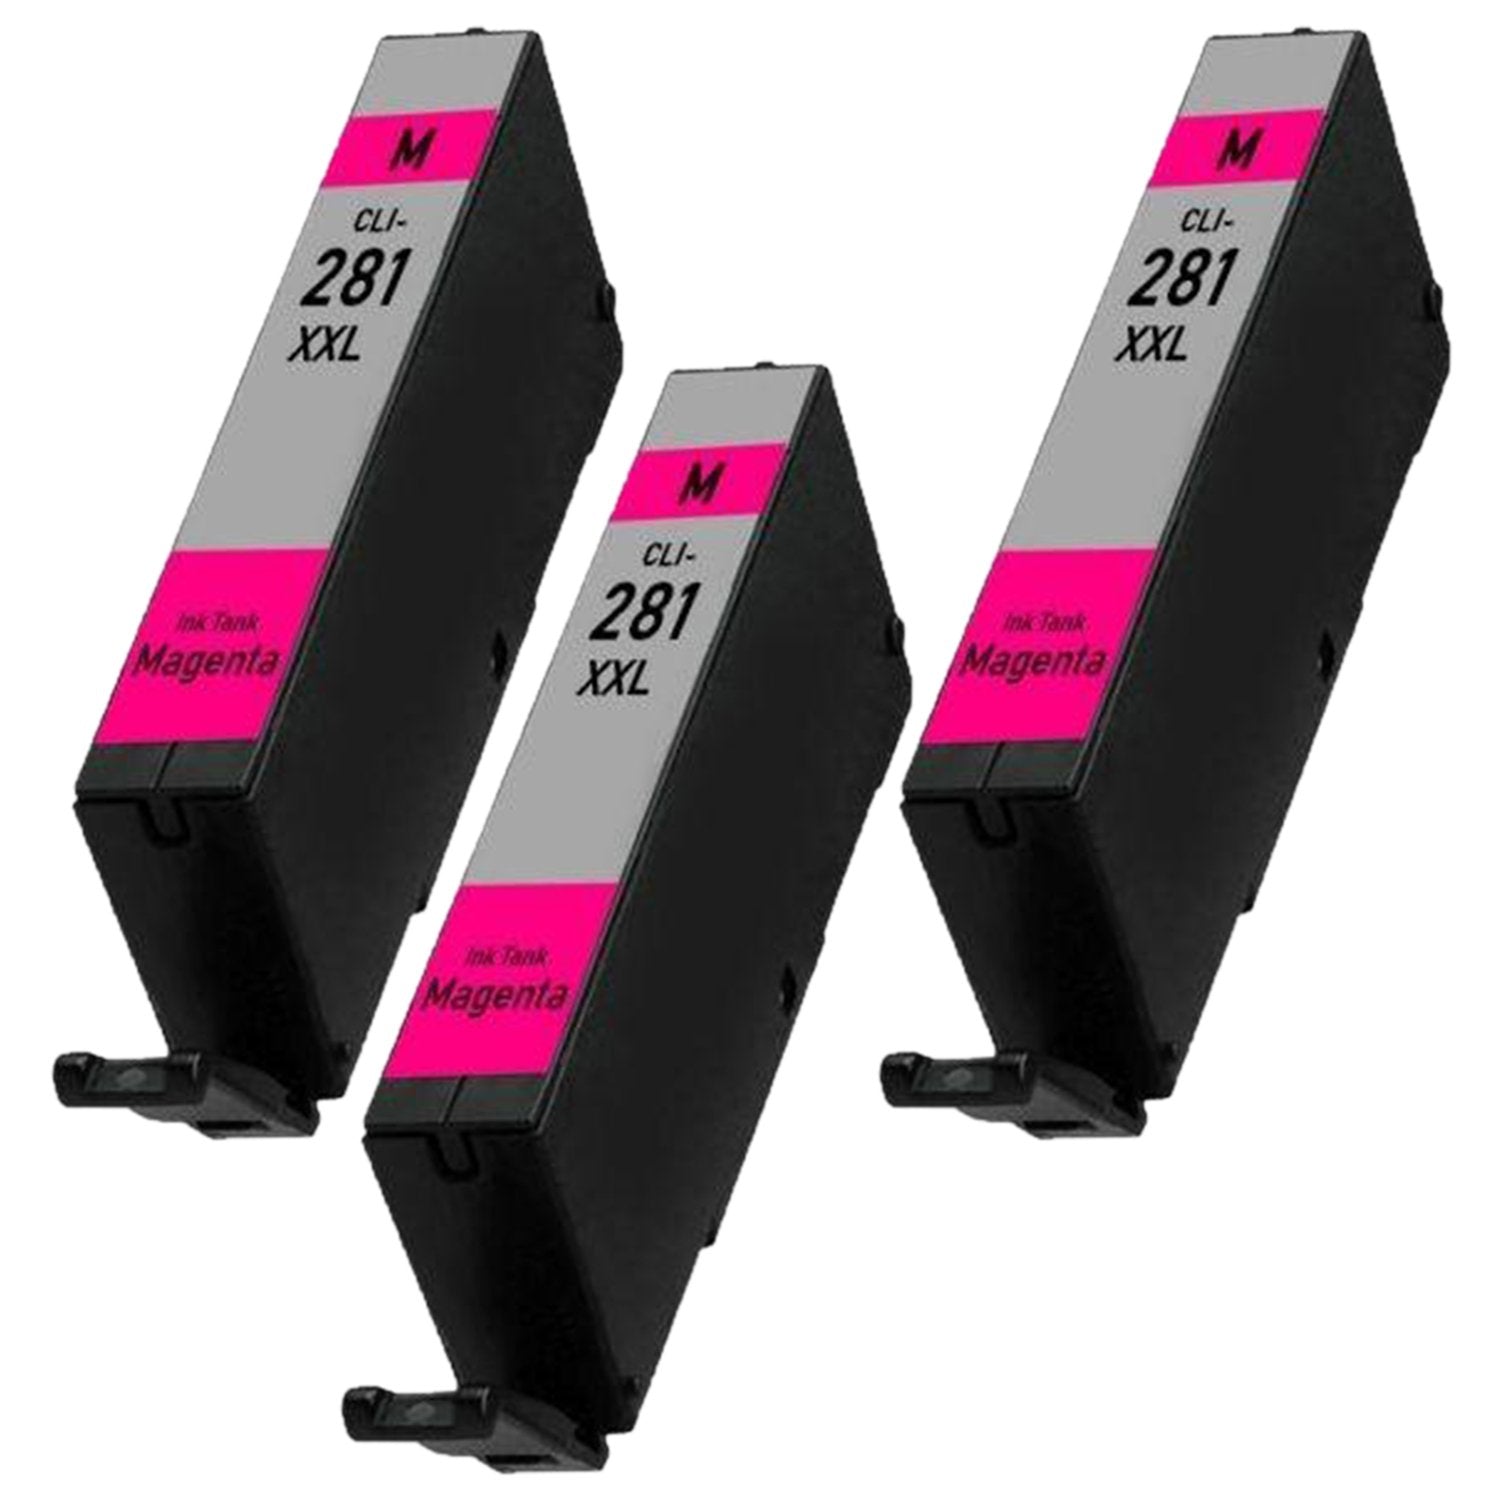 Absolute Toner Compatible Canon CLI-281XXL Magenta Super High Yield Ink Cartridge (1981C001) | Absolute Toner Canon Ink Cartridges